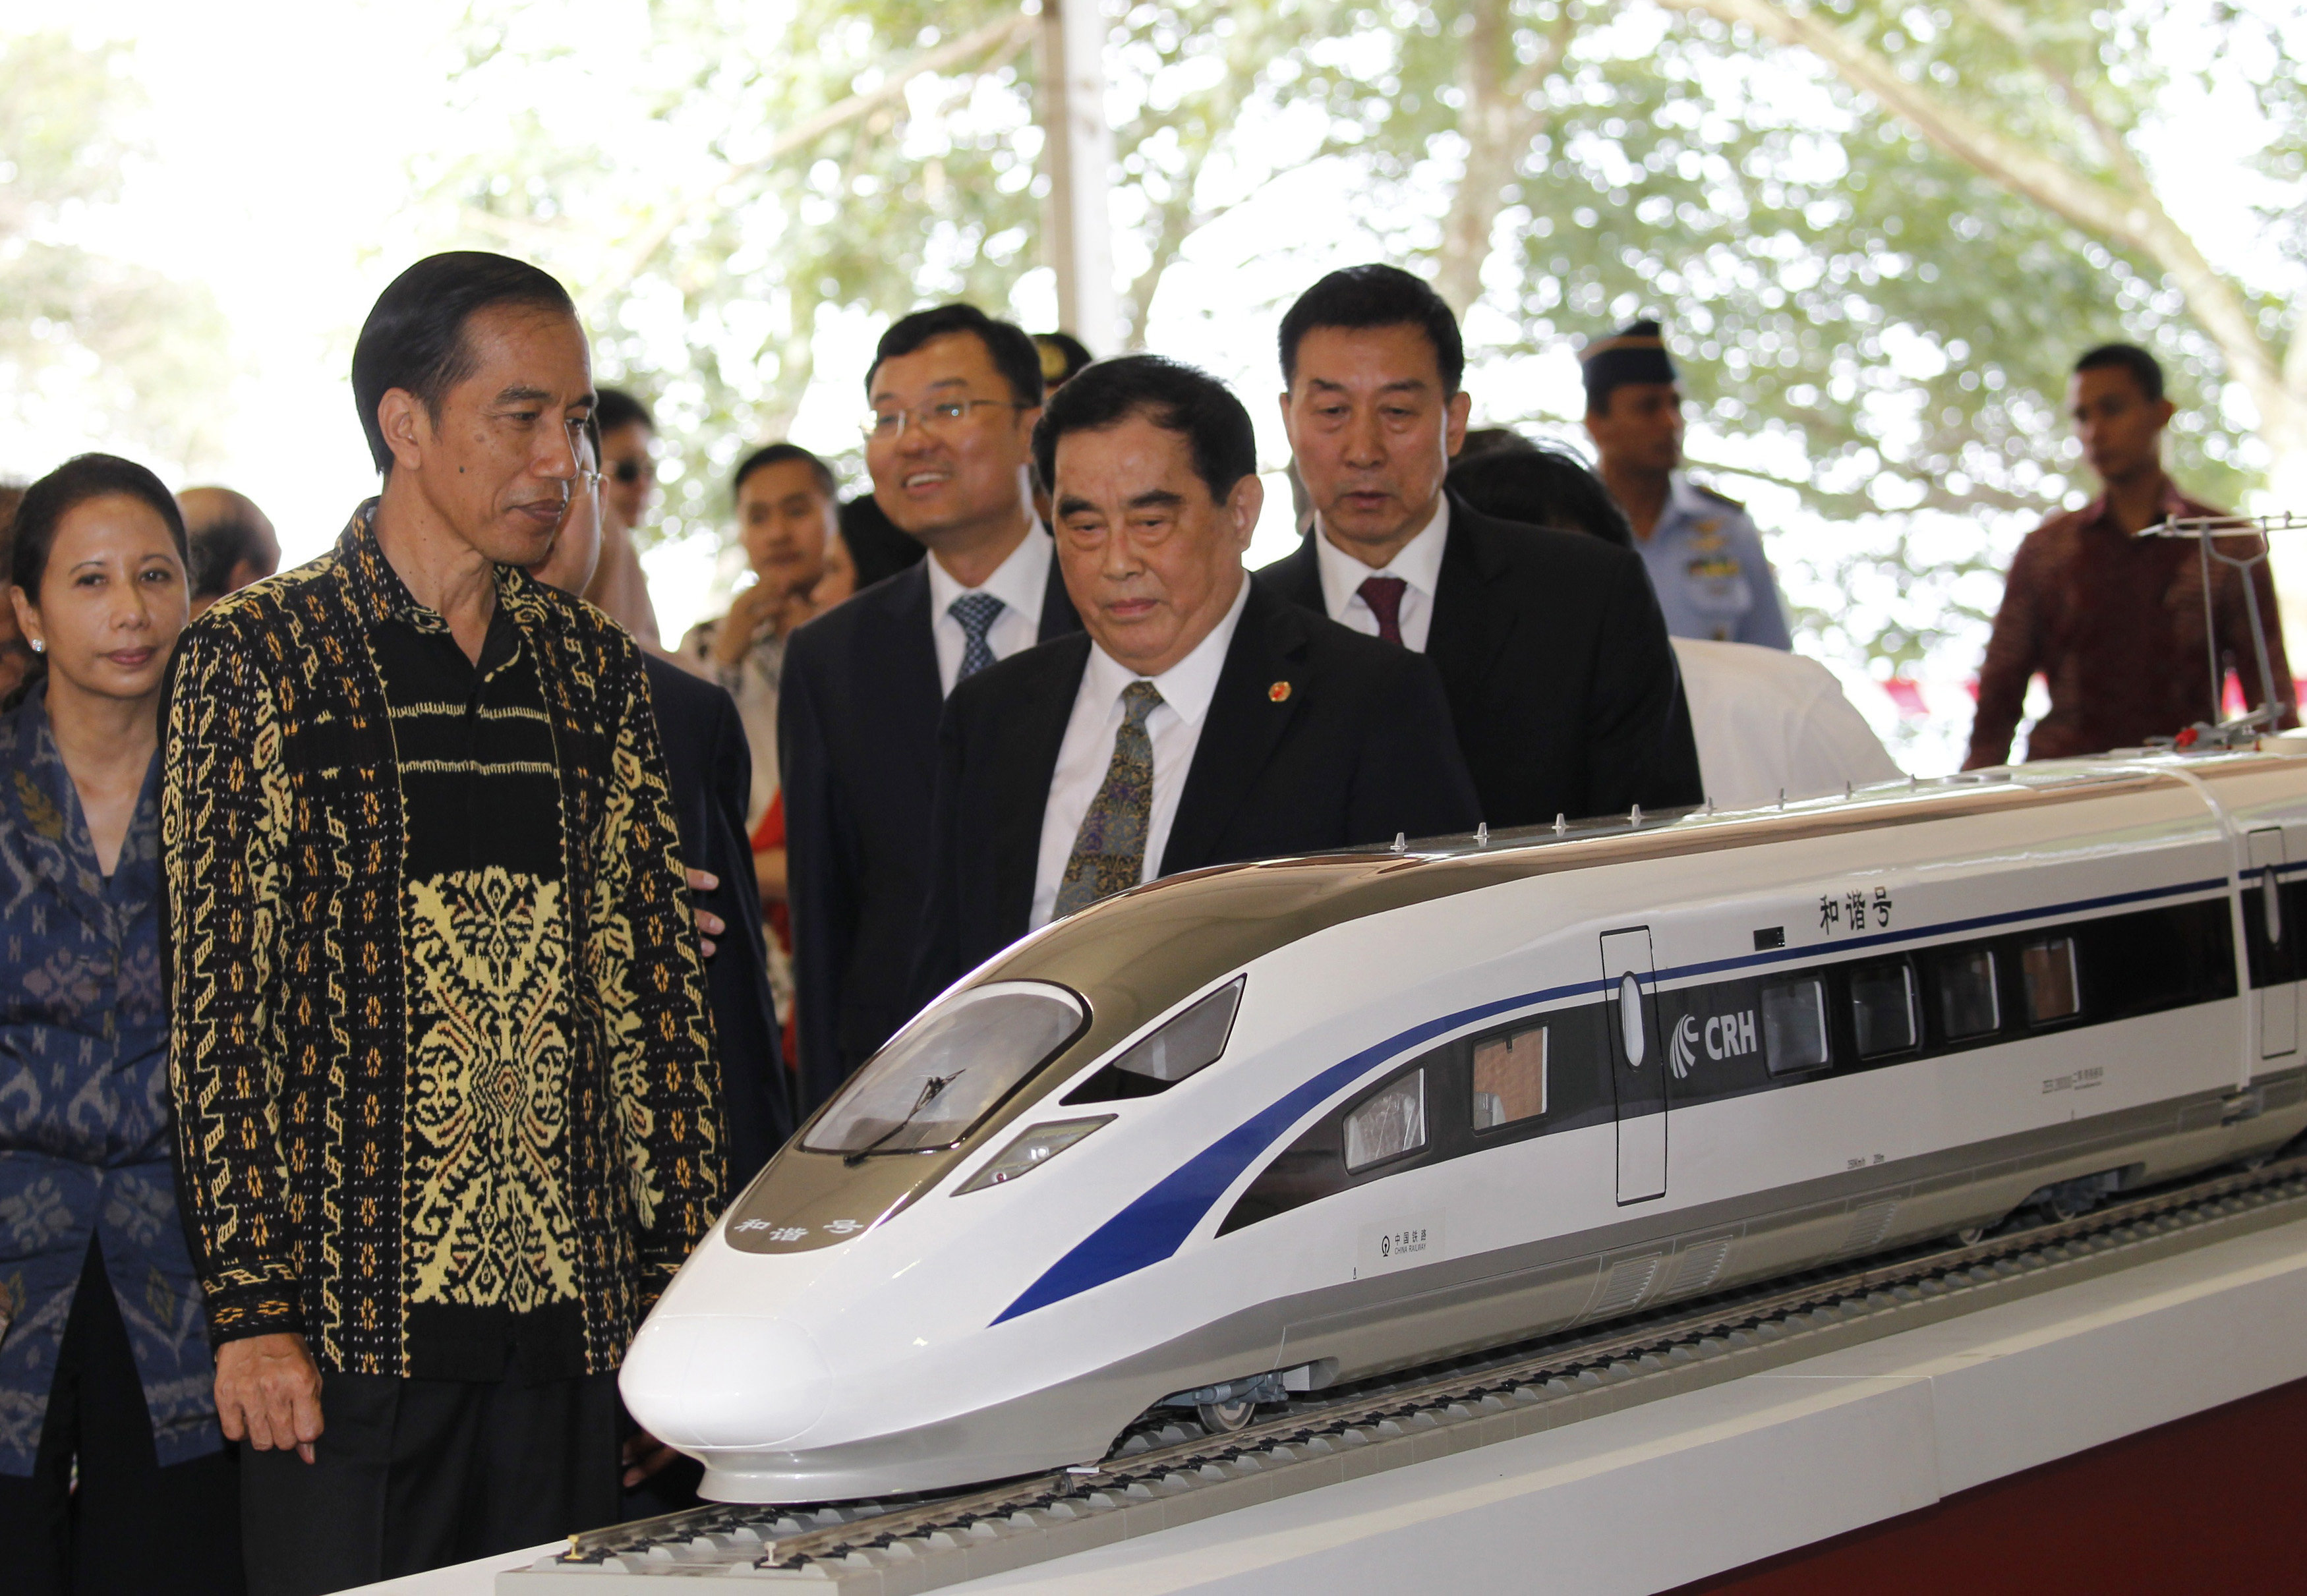 Indonesian President Joko Widodo (2nd L) and the general manager of China Railway Corp. Sheng Guangzu (C) stand next to a model of a train while attending a ground breaking ceremony for the Jakarta-Bandung fast-train railway line in Walini, West Java province, Indonesia January 21, 2016. REUTERS/Garry Lotulung FOR EDITORIAL USE ONLY. NO RESALES. NO ARCHIVES.